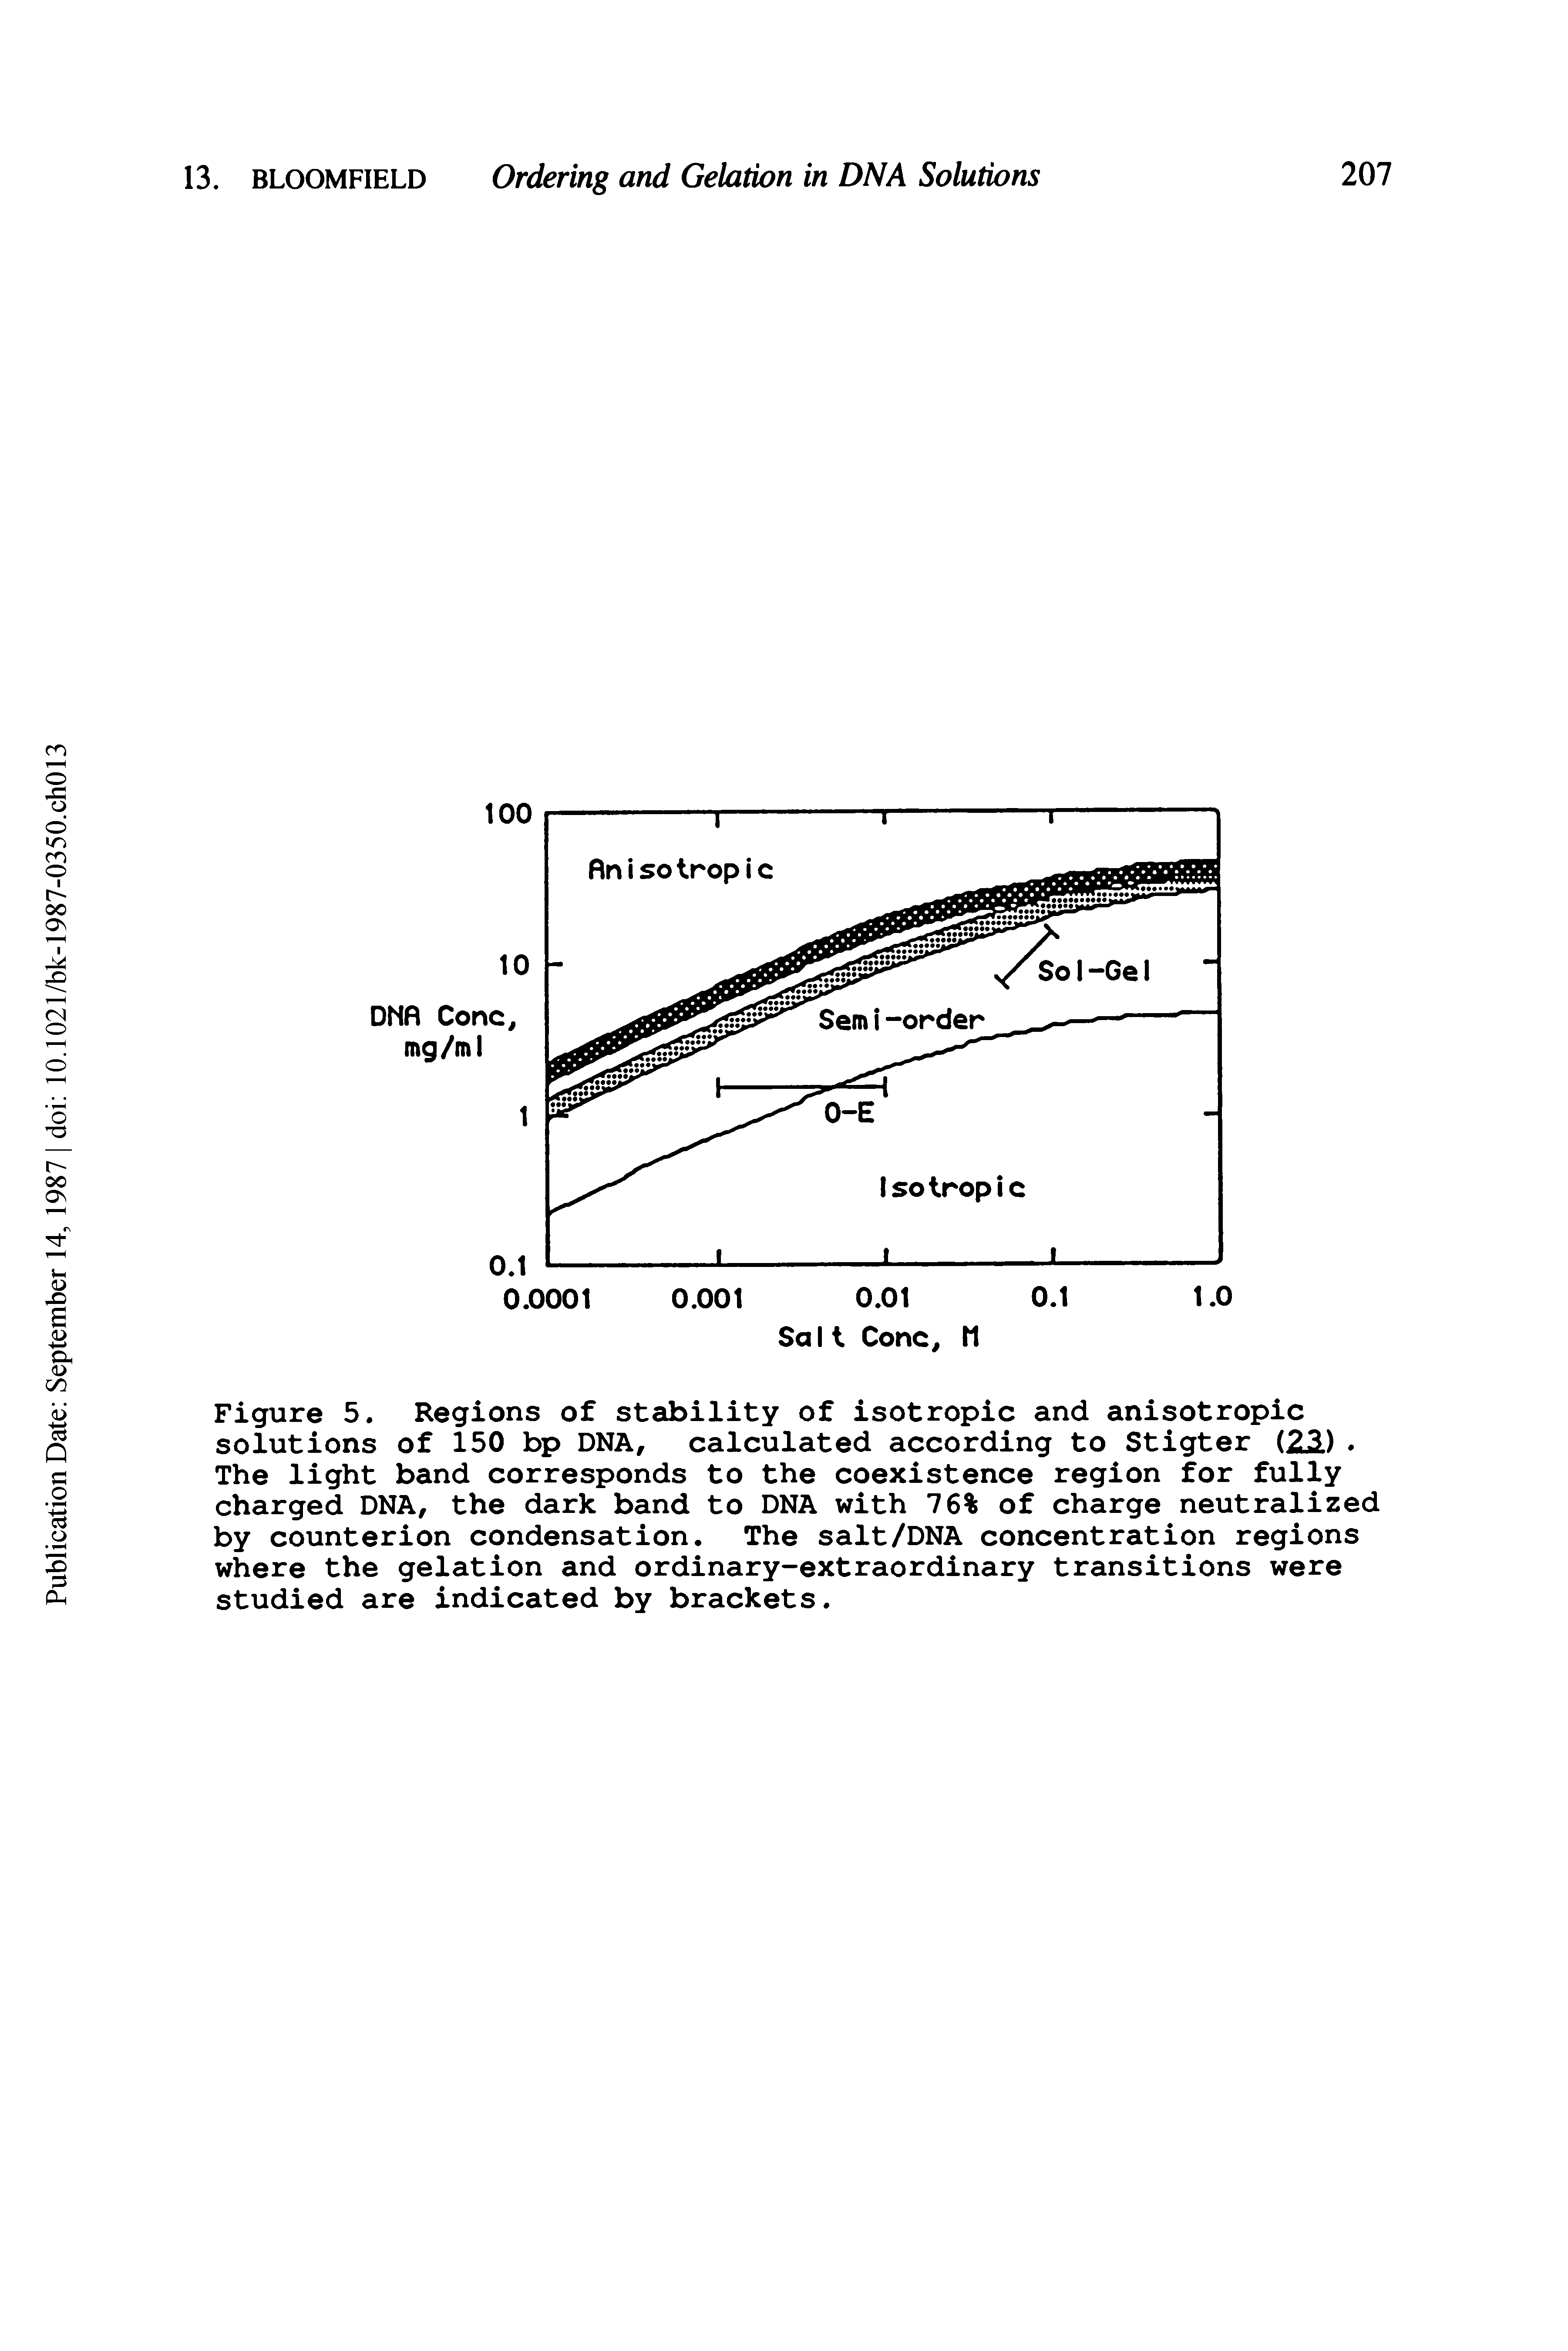 Figure 5. Regions of stability of isotropic and anisotropic solutions of 150 bp DNA, calculated according to Stigter 22L) The light band corresponds to the coexistence region for fully charged DNA, the dark band to DNA with 76% of charge neutralized by counterion condensation. The salt/DNA concentration regions where the gelation and ordinary-extraordinary transitions were studied are indicated by brackets.